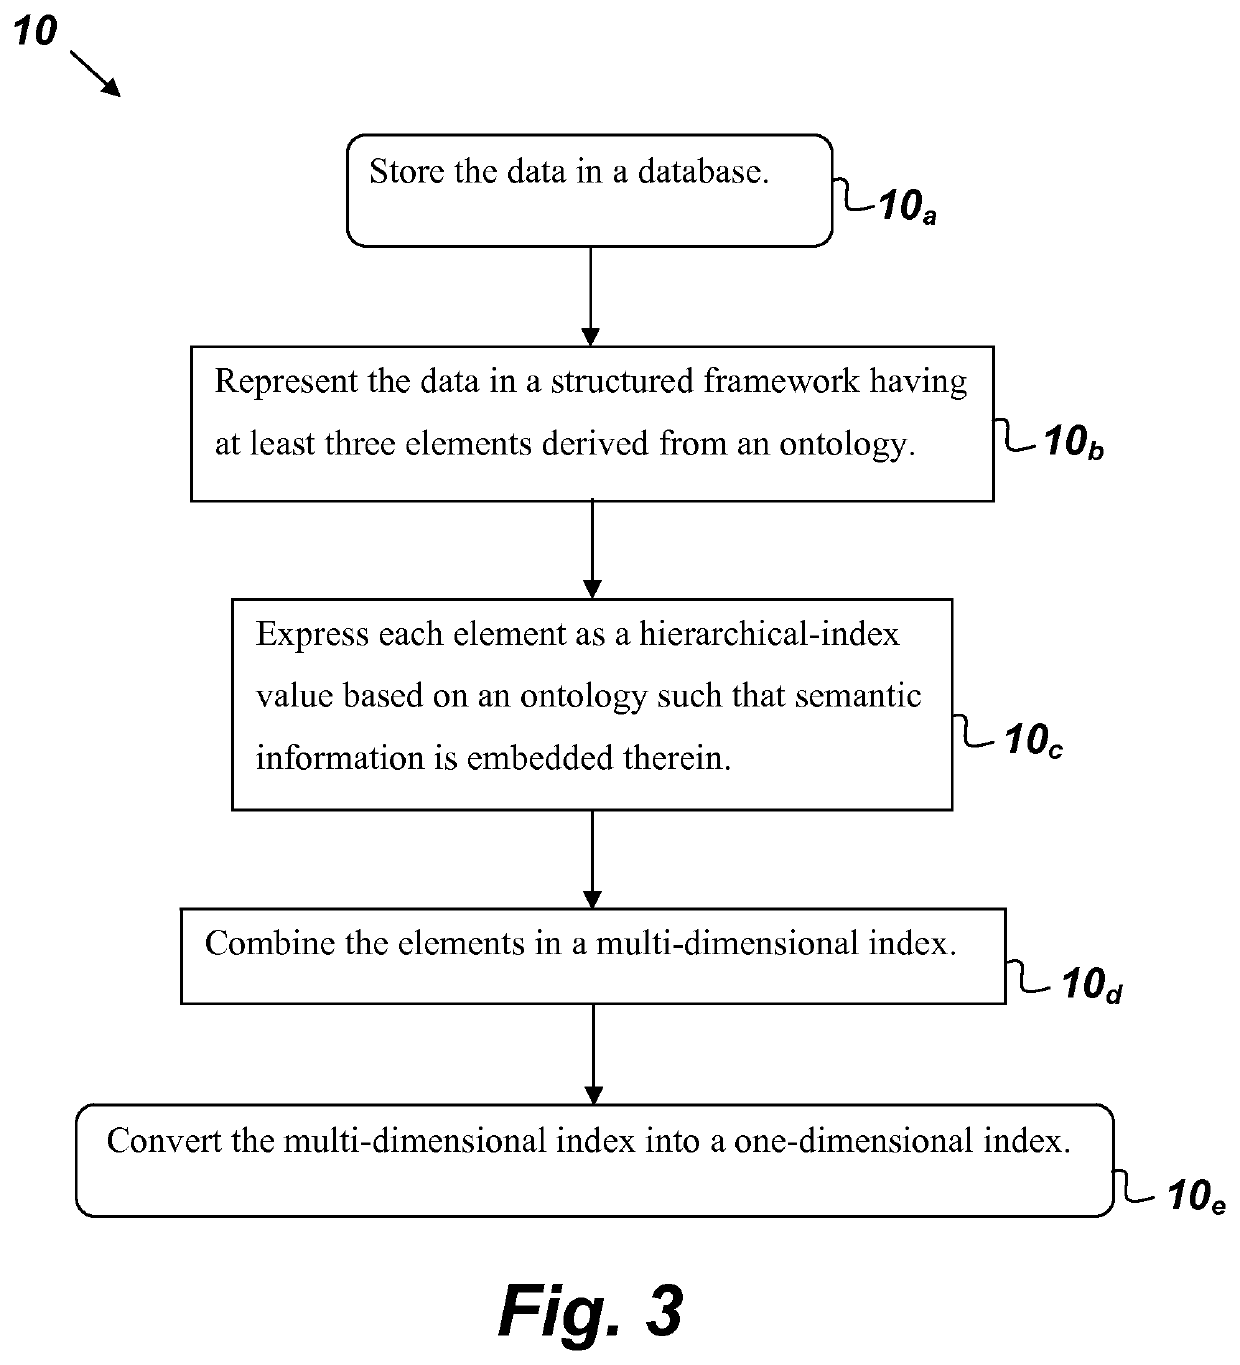 Method for semantic indexing of big data using a multidimensional, hierarchical scheme